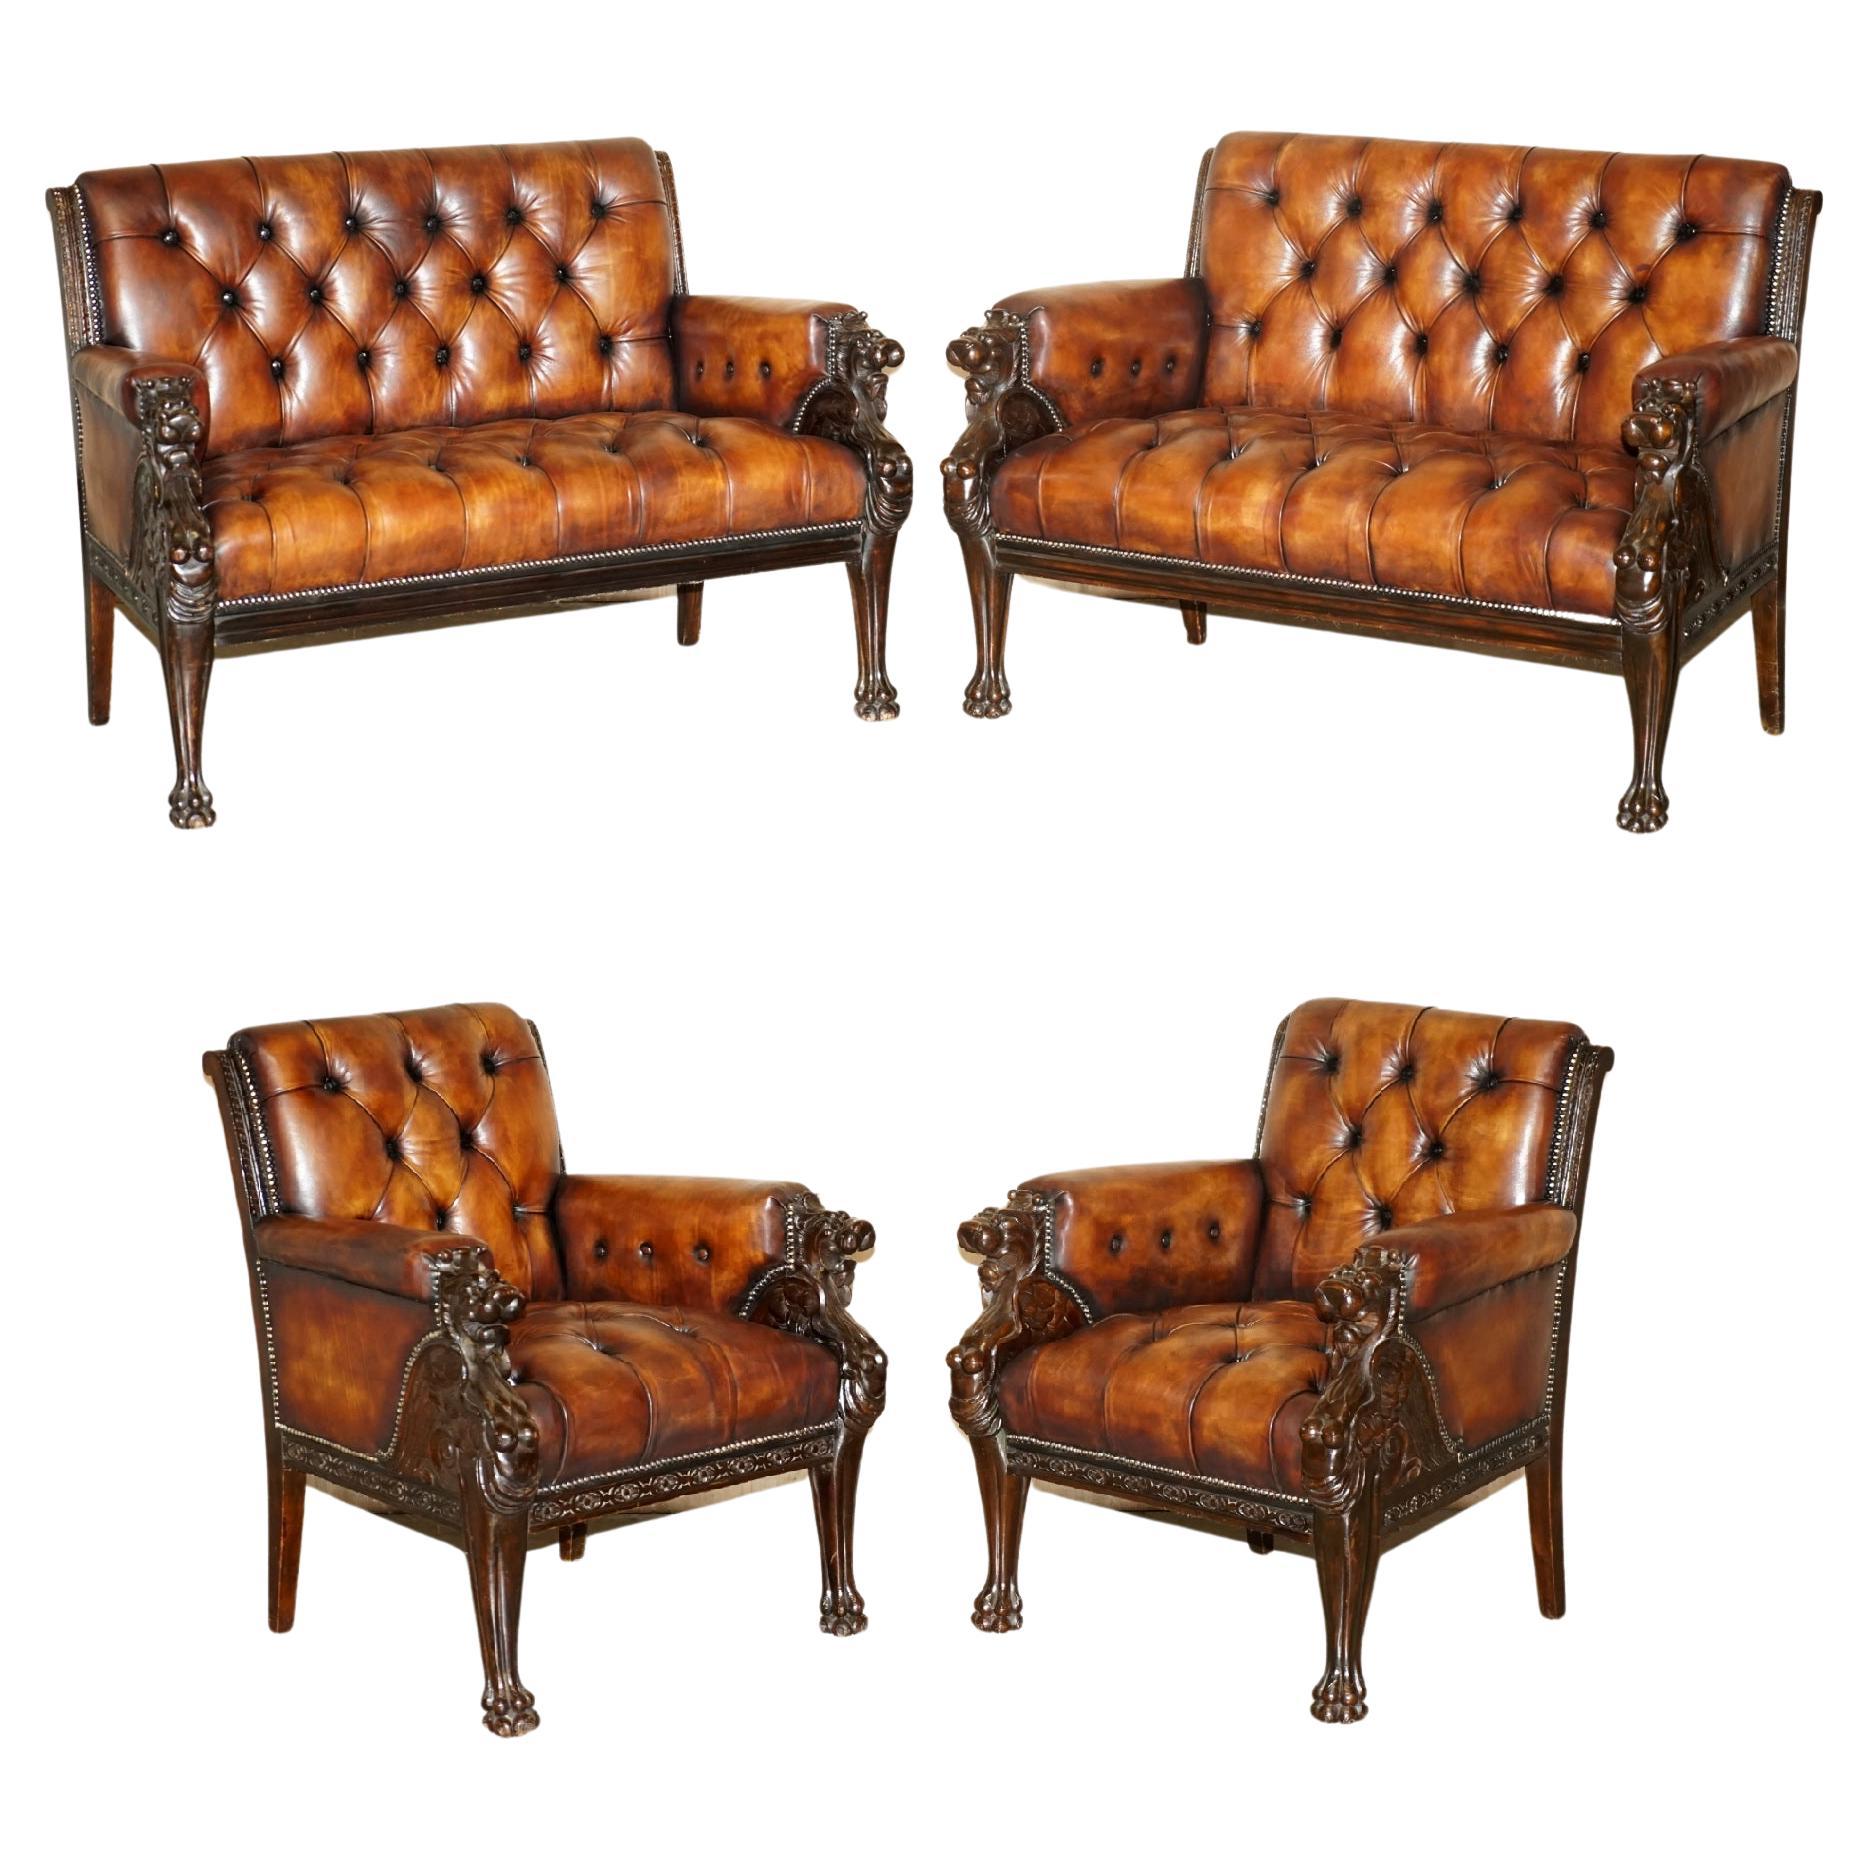 RESTORED ANTIQUE LiON HAND CARVED BROWN LEATHER CHESTERFIELD SOFA ARMCHAIR SUITE im Angebot